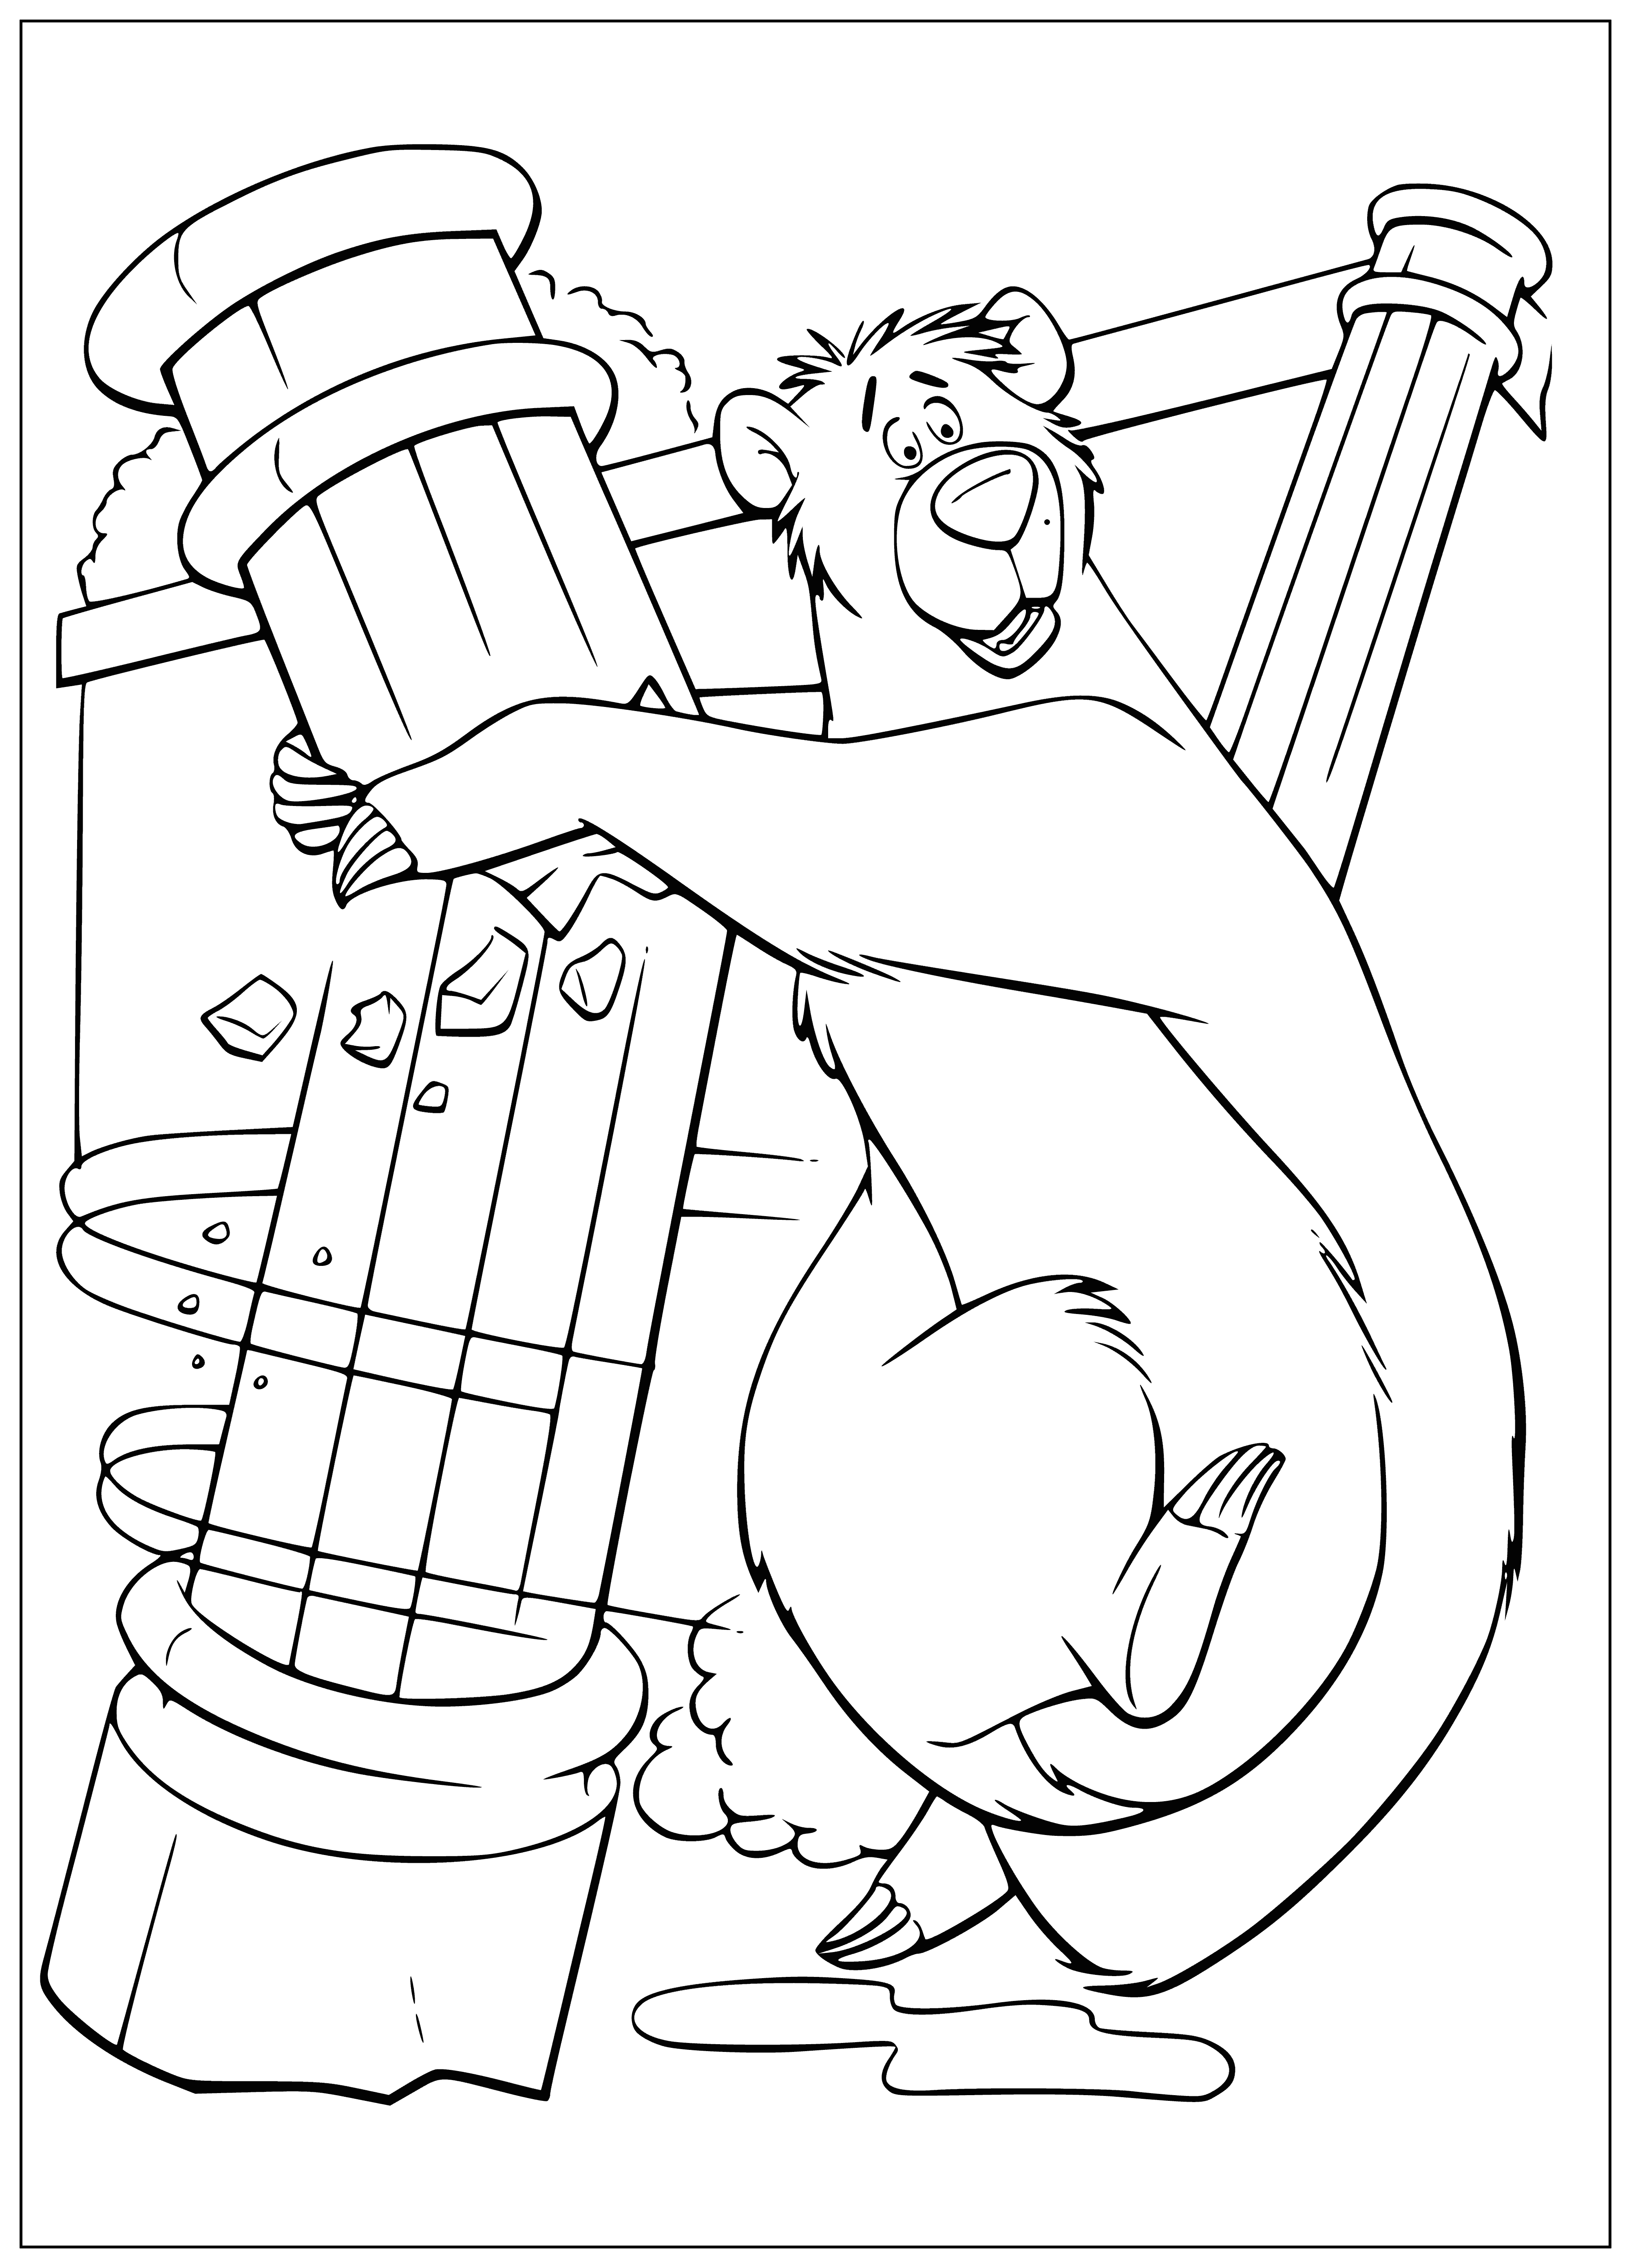 coloring page: Baloo Bear stands in a forest, wide-mouthed and claws raised, with a green neckerchief and a leaf in his mouth. Behind him, a monkey climbs up the tree. #JungleBook